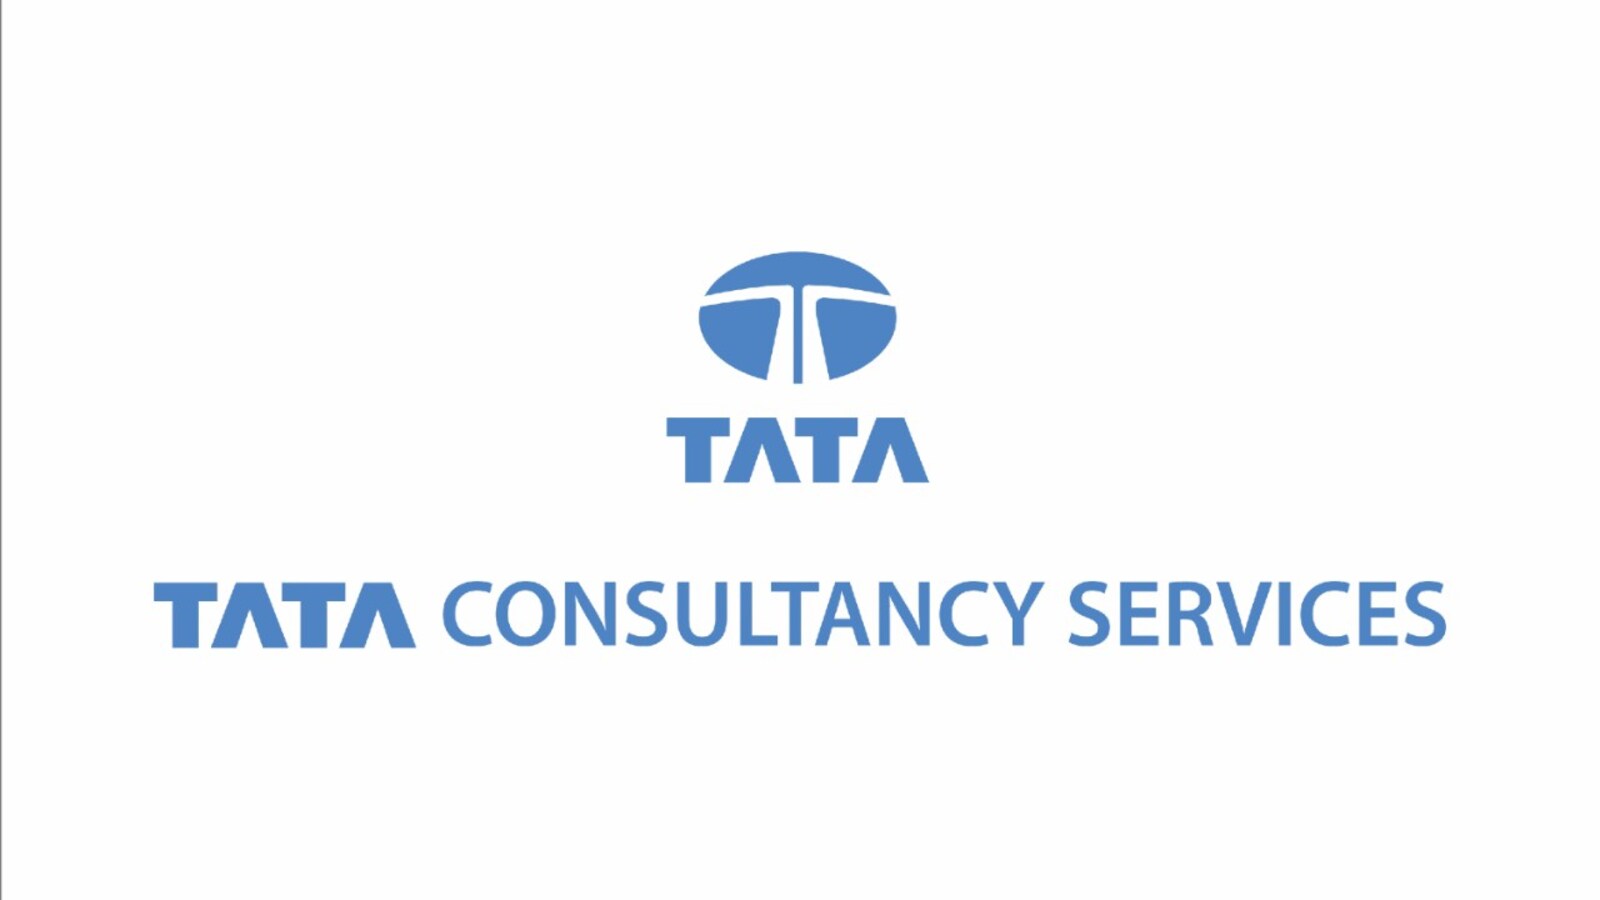 What does the recent TCS lawsuit mean for the company and IT sector